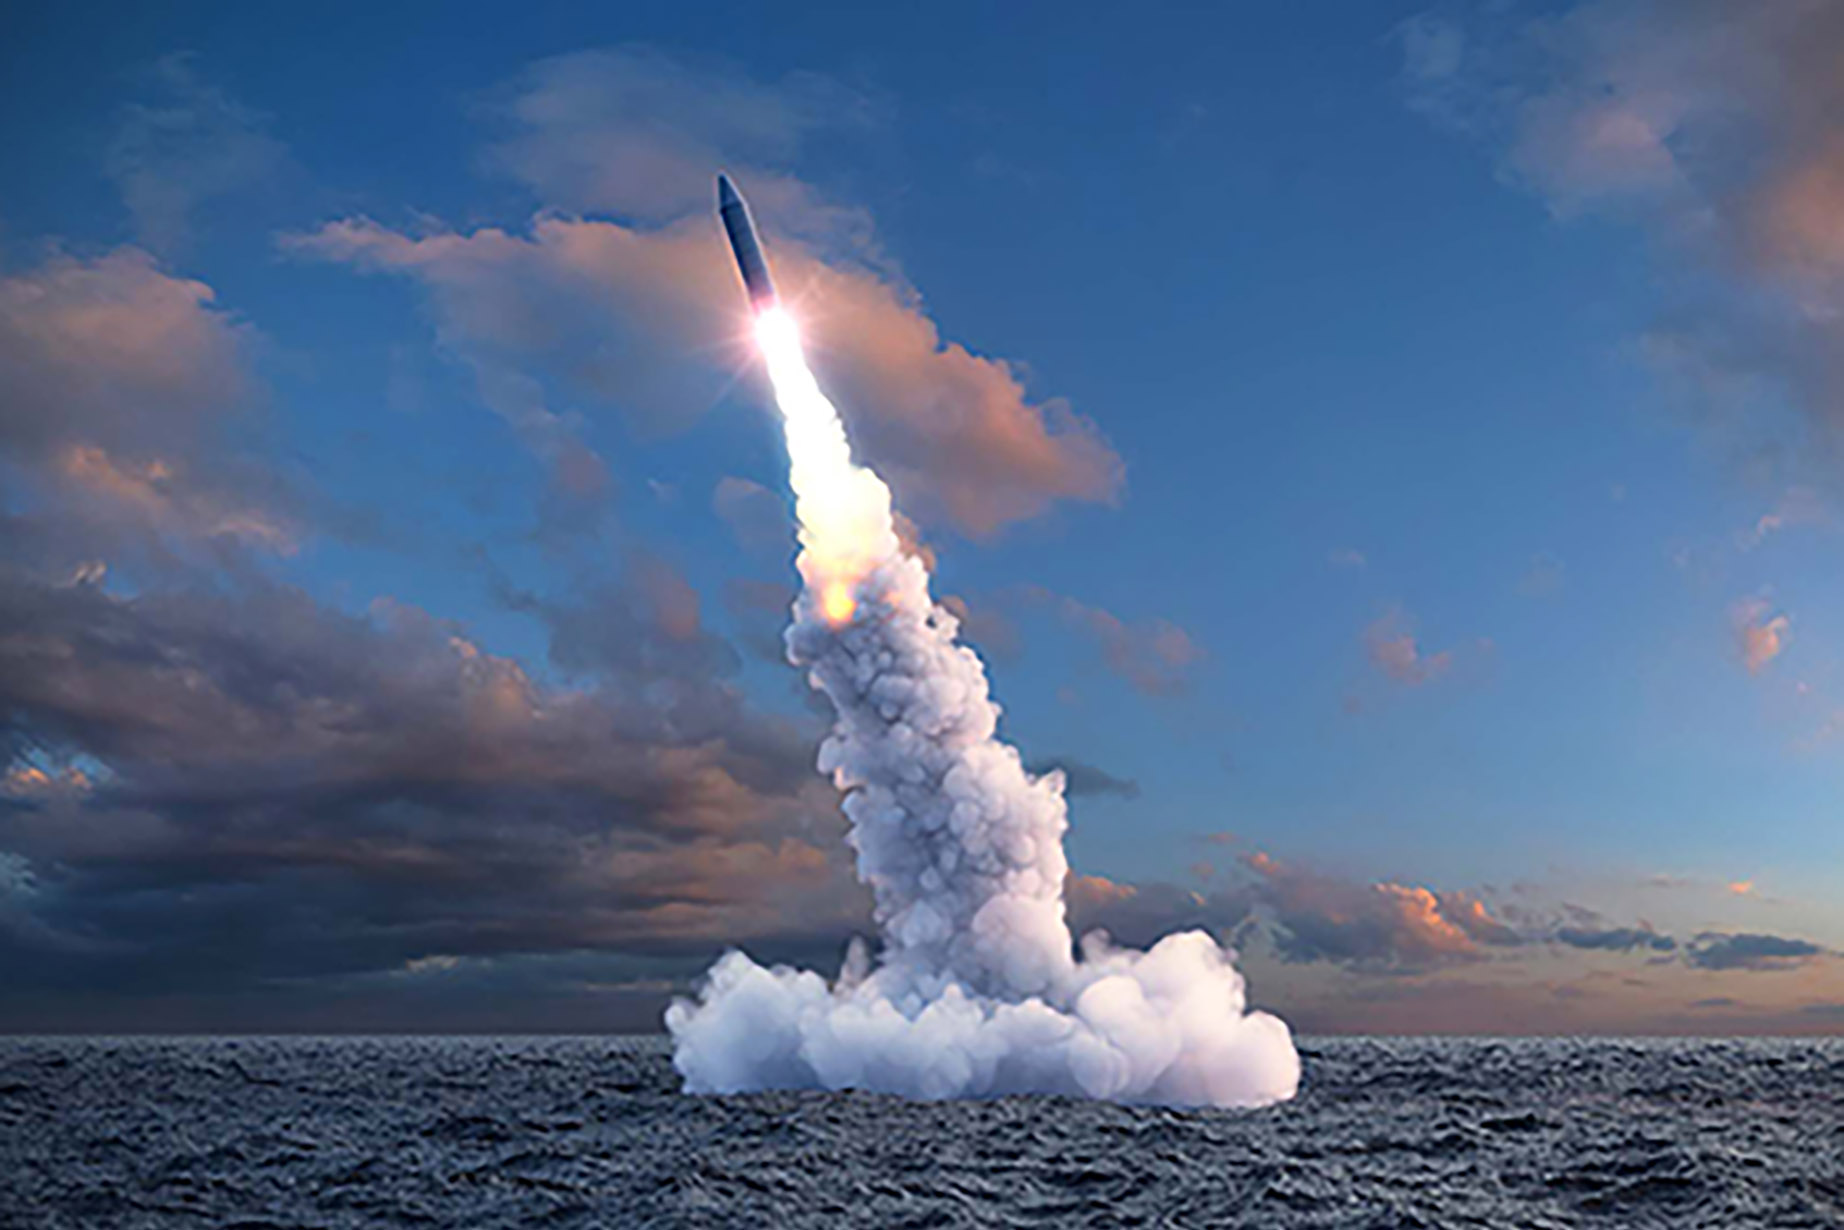 The launch of a ballistic missile from under water